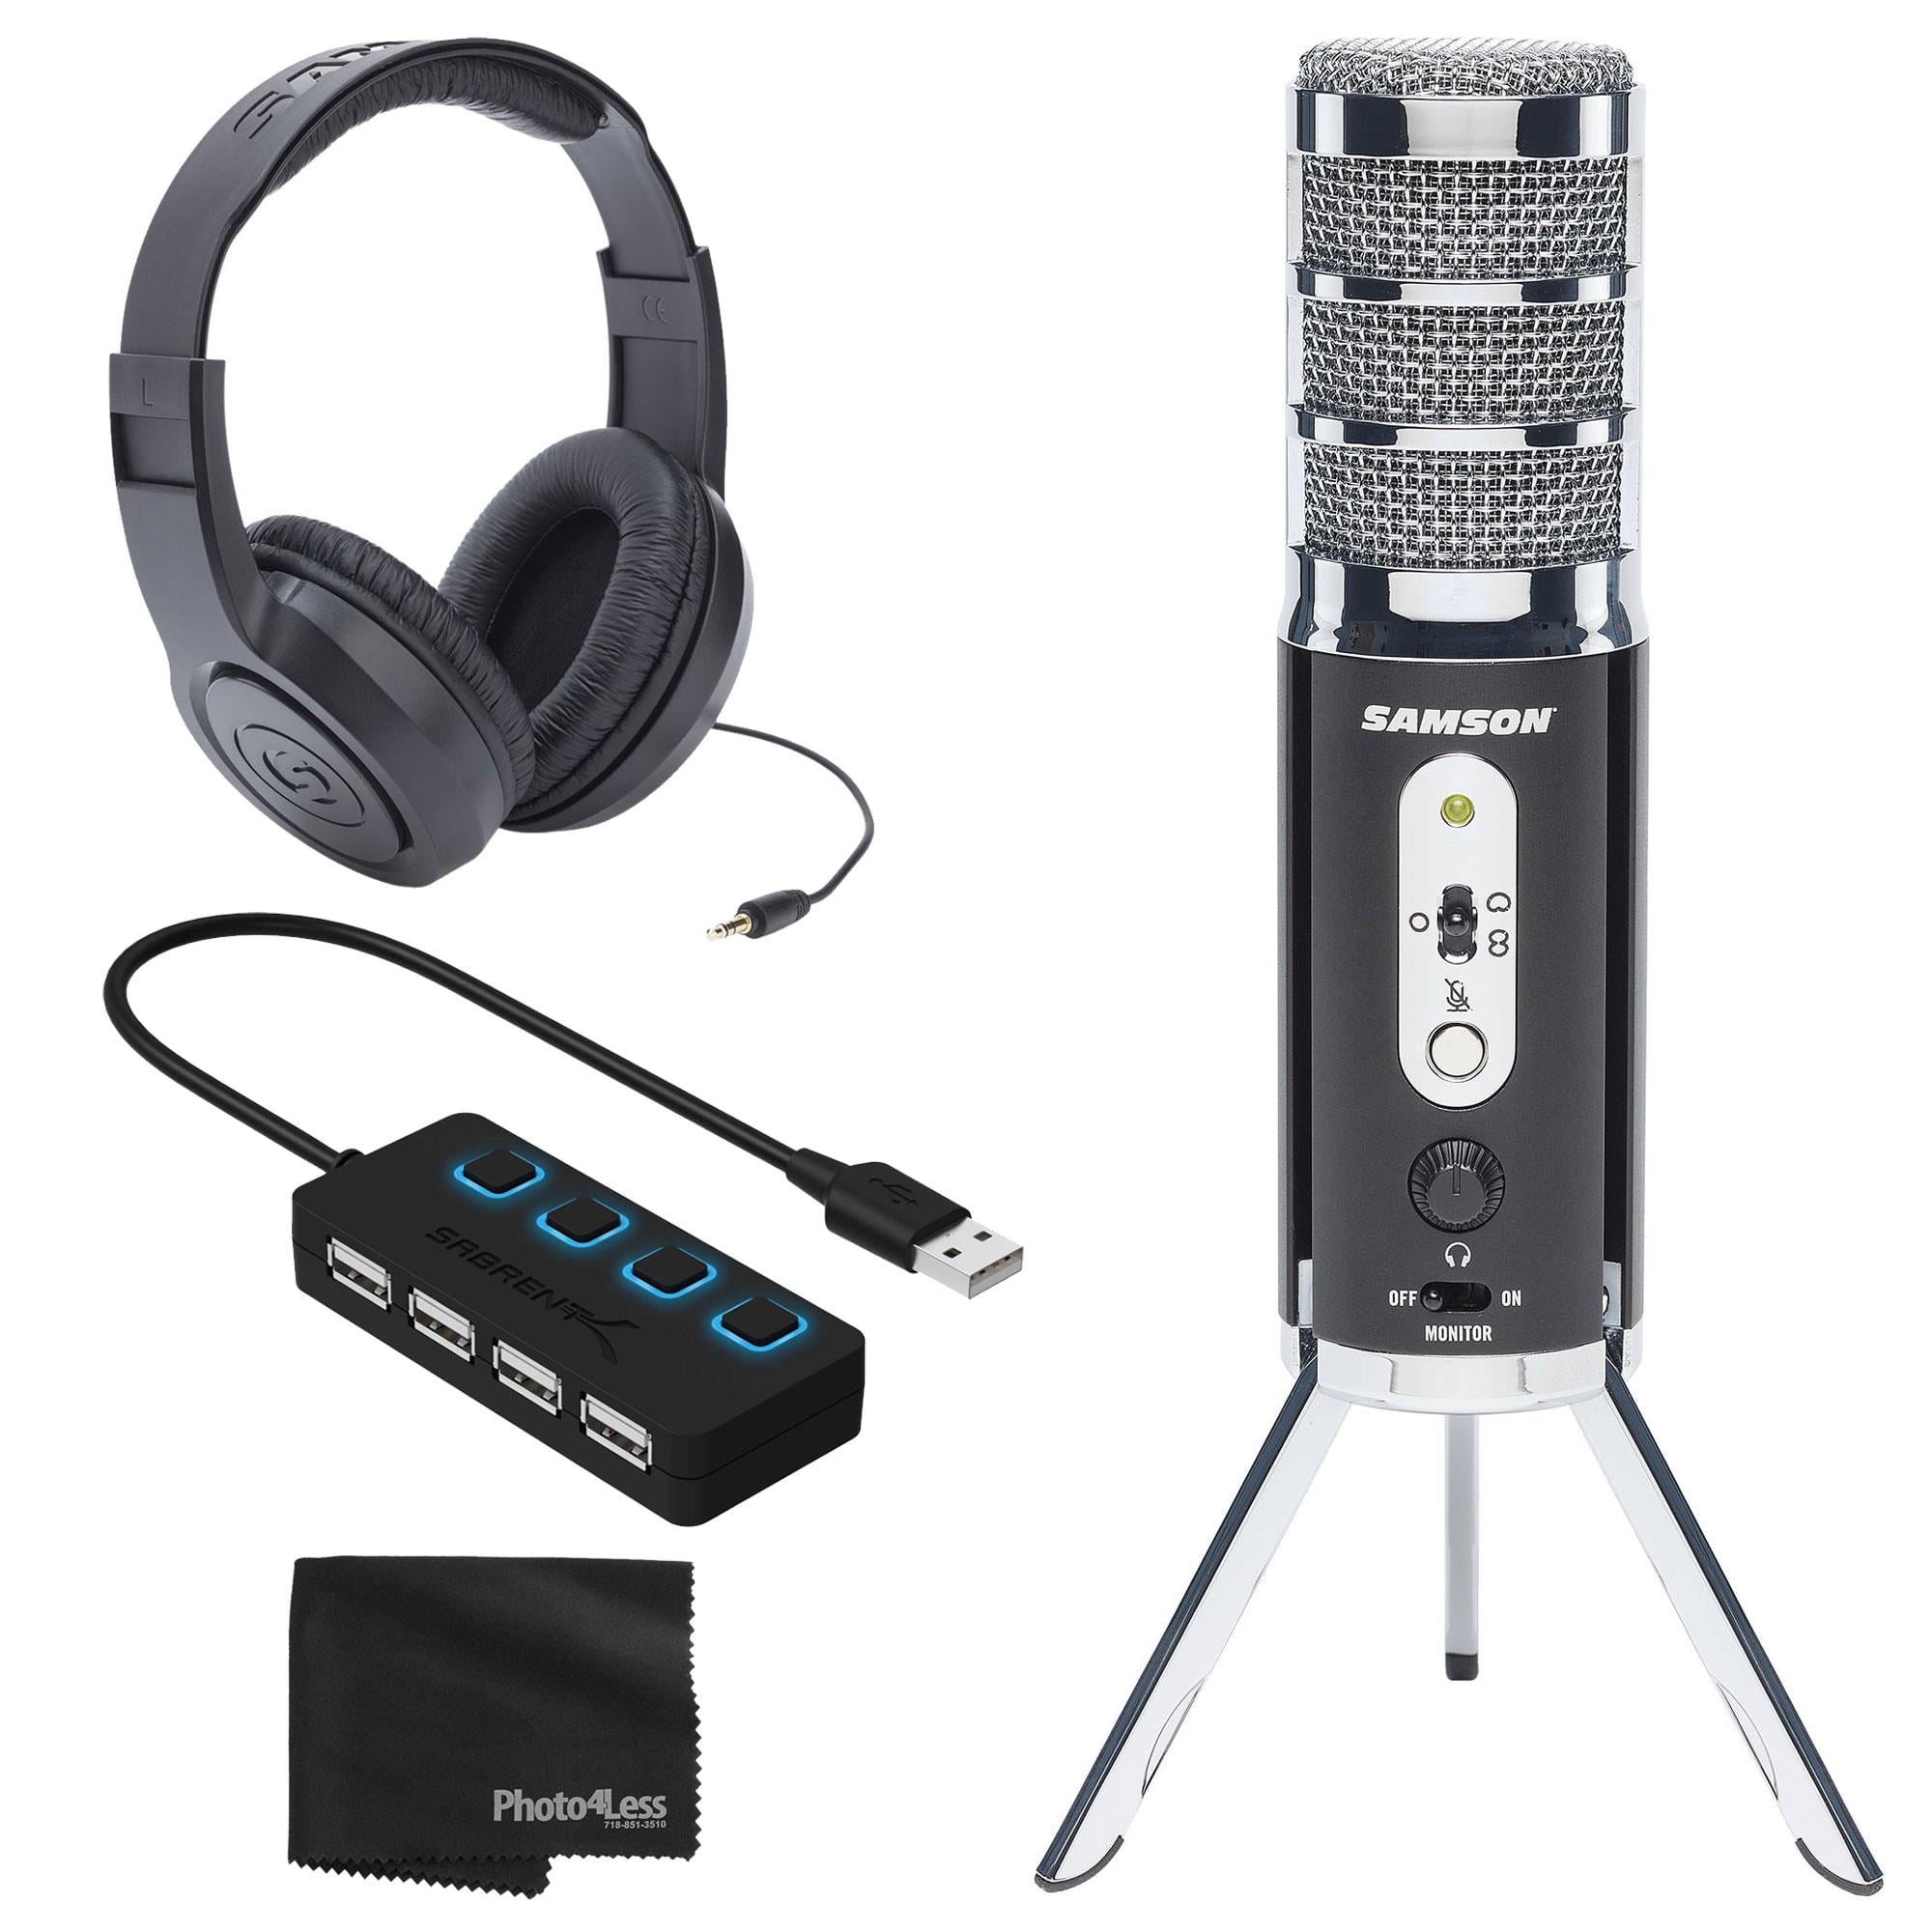 Samson Satellite USB/iOS Broadcast Microphone with Dual 16mm Condenser  Capsules + Samson Over-Ear Stereo Headphones - 4-Port USB 2.0 Hub with 